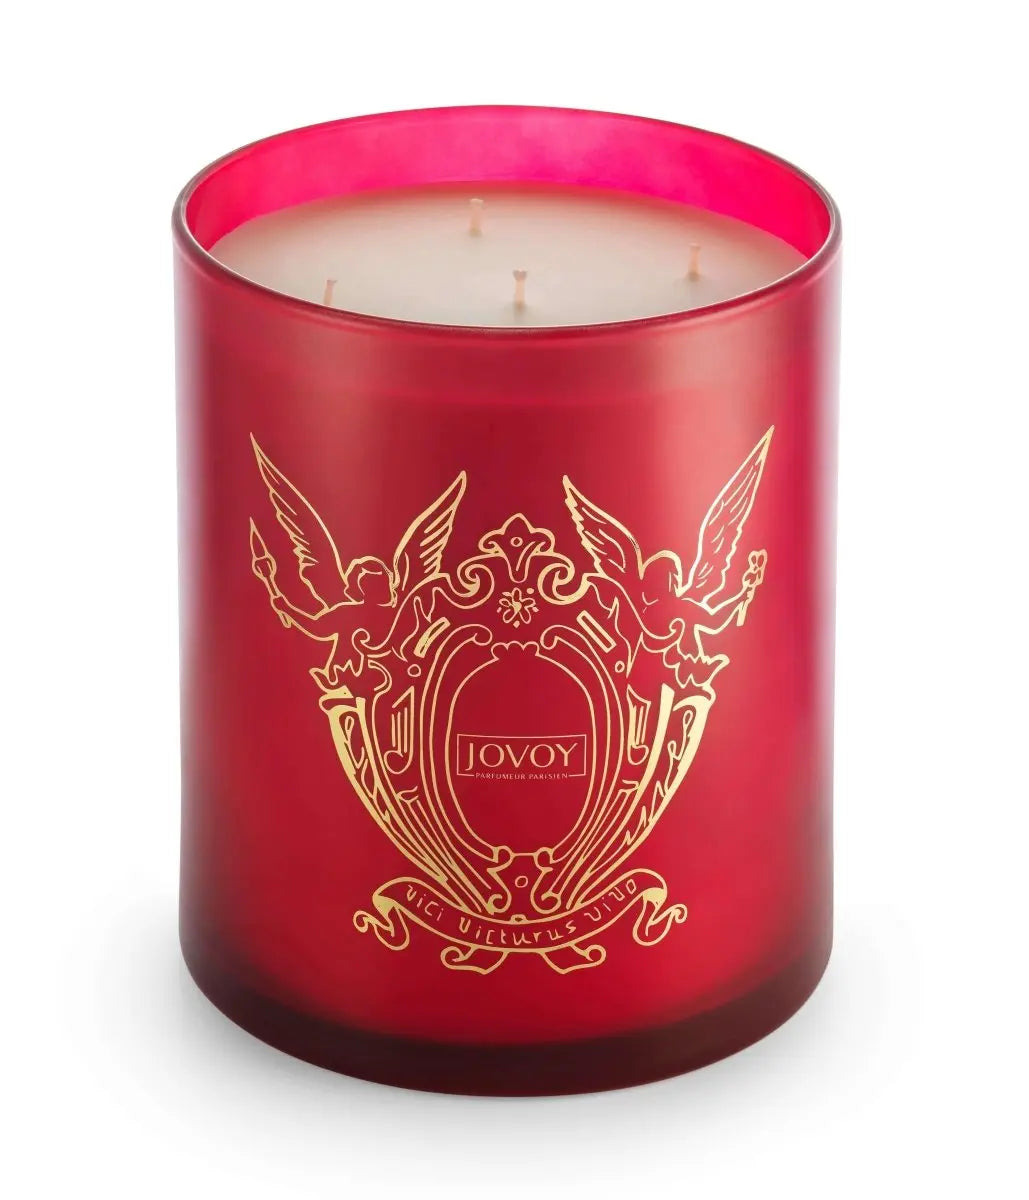 Jovoy Candles 185 gr. - Marron \/ Without Bell